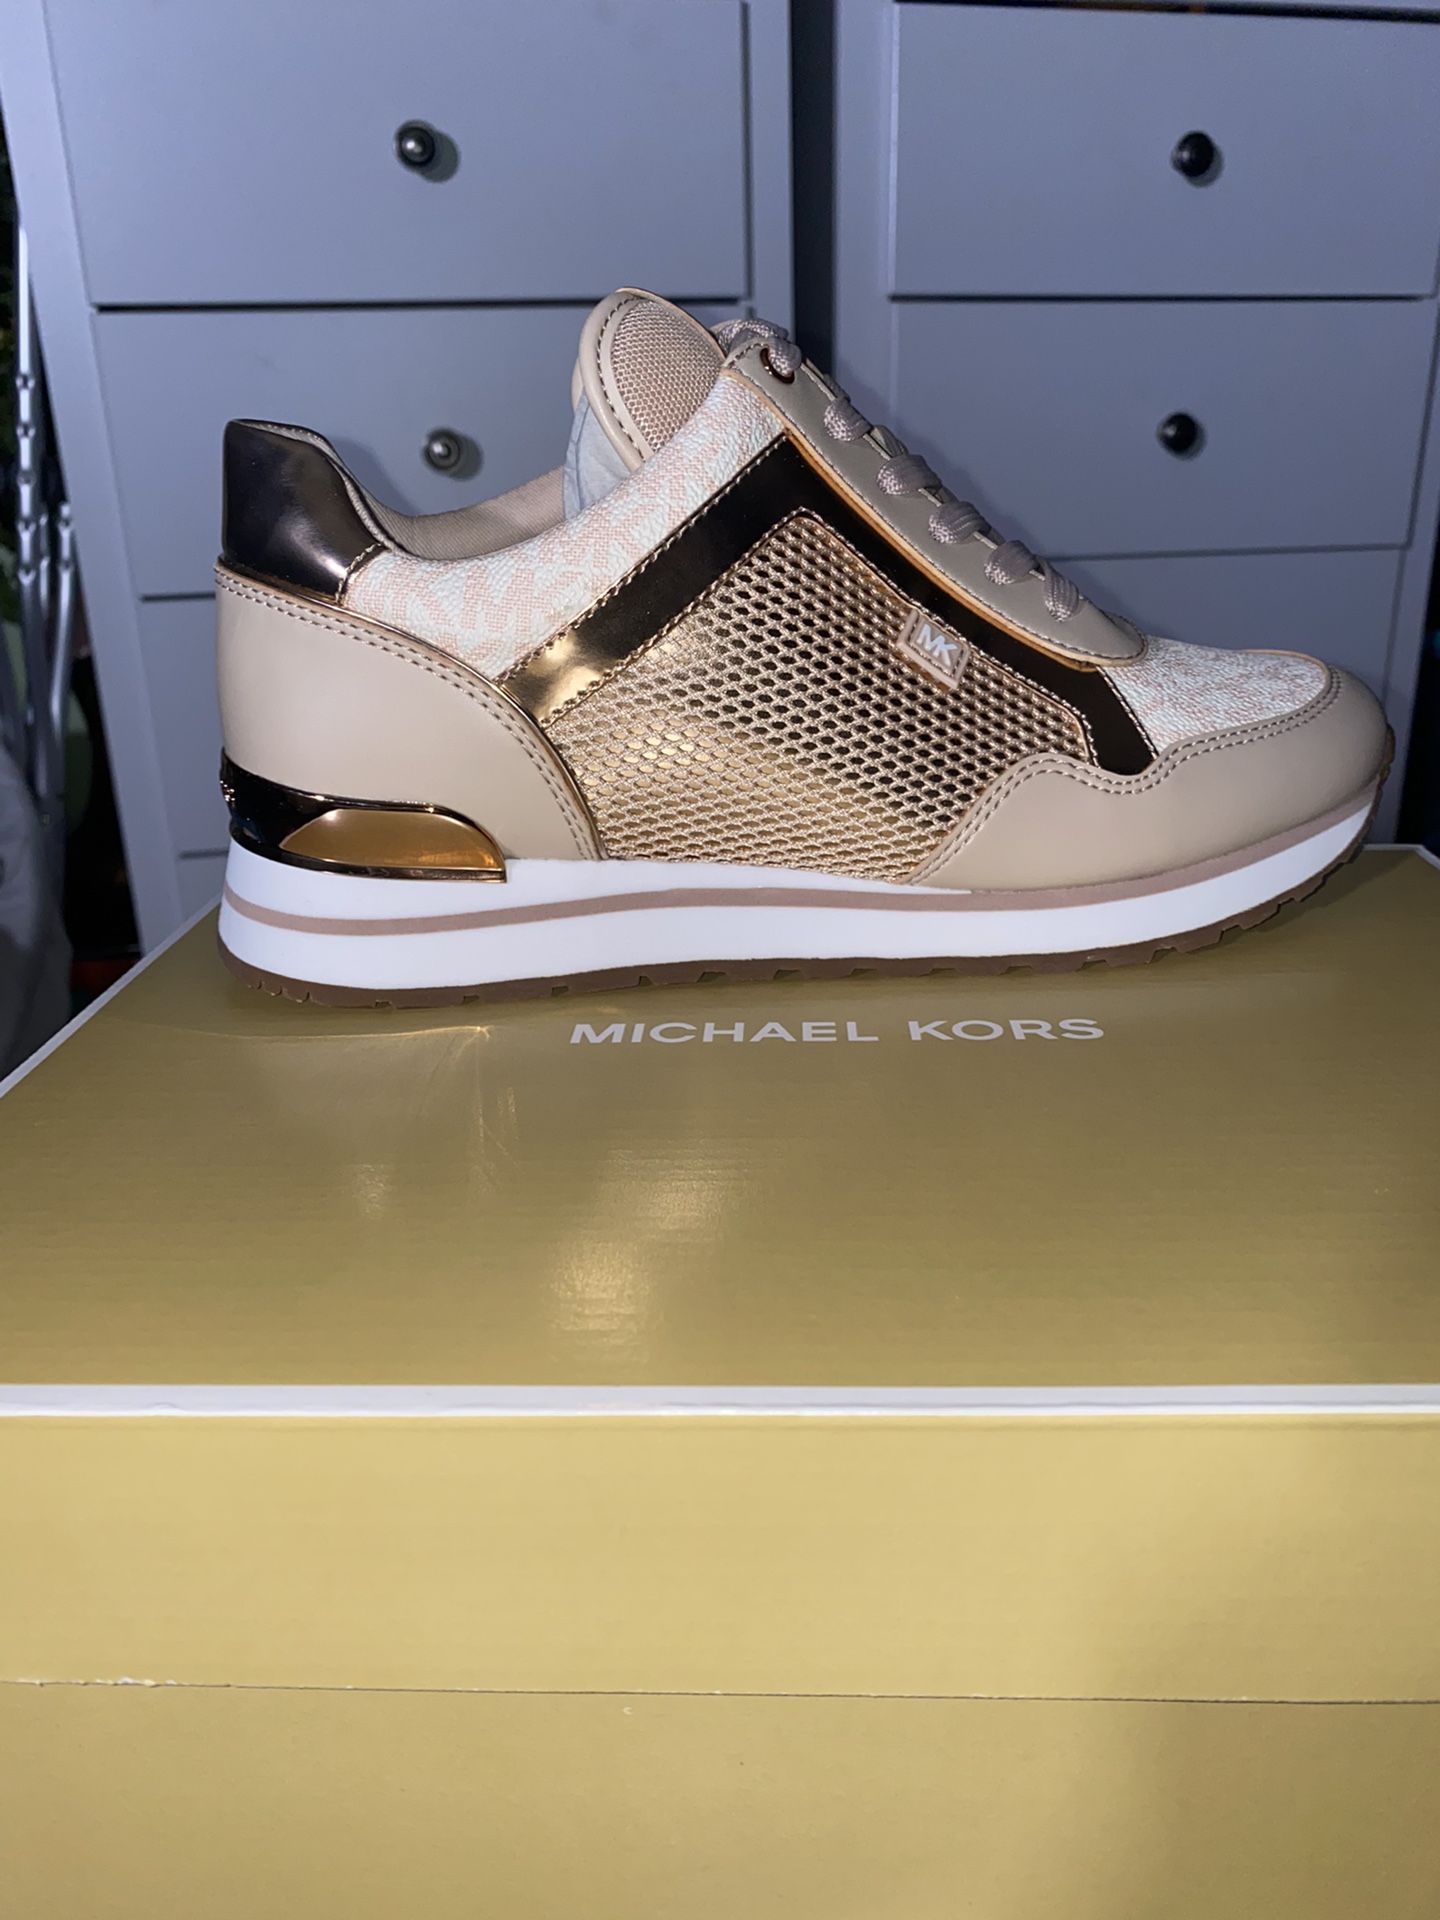 MICHAEL KORS Shoes MADDY TRAINER 